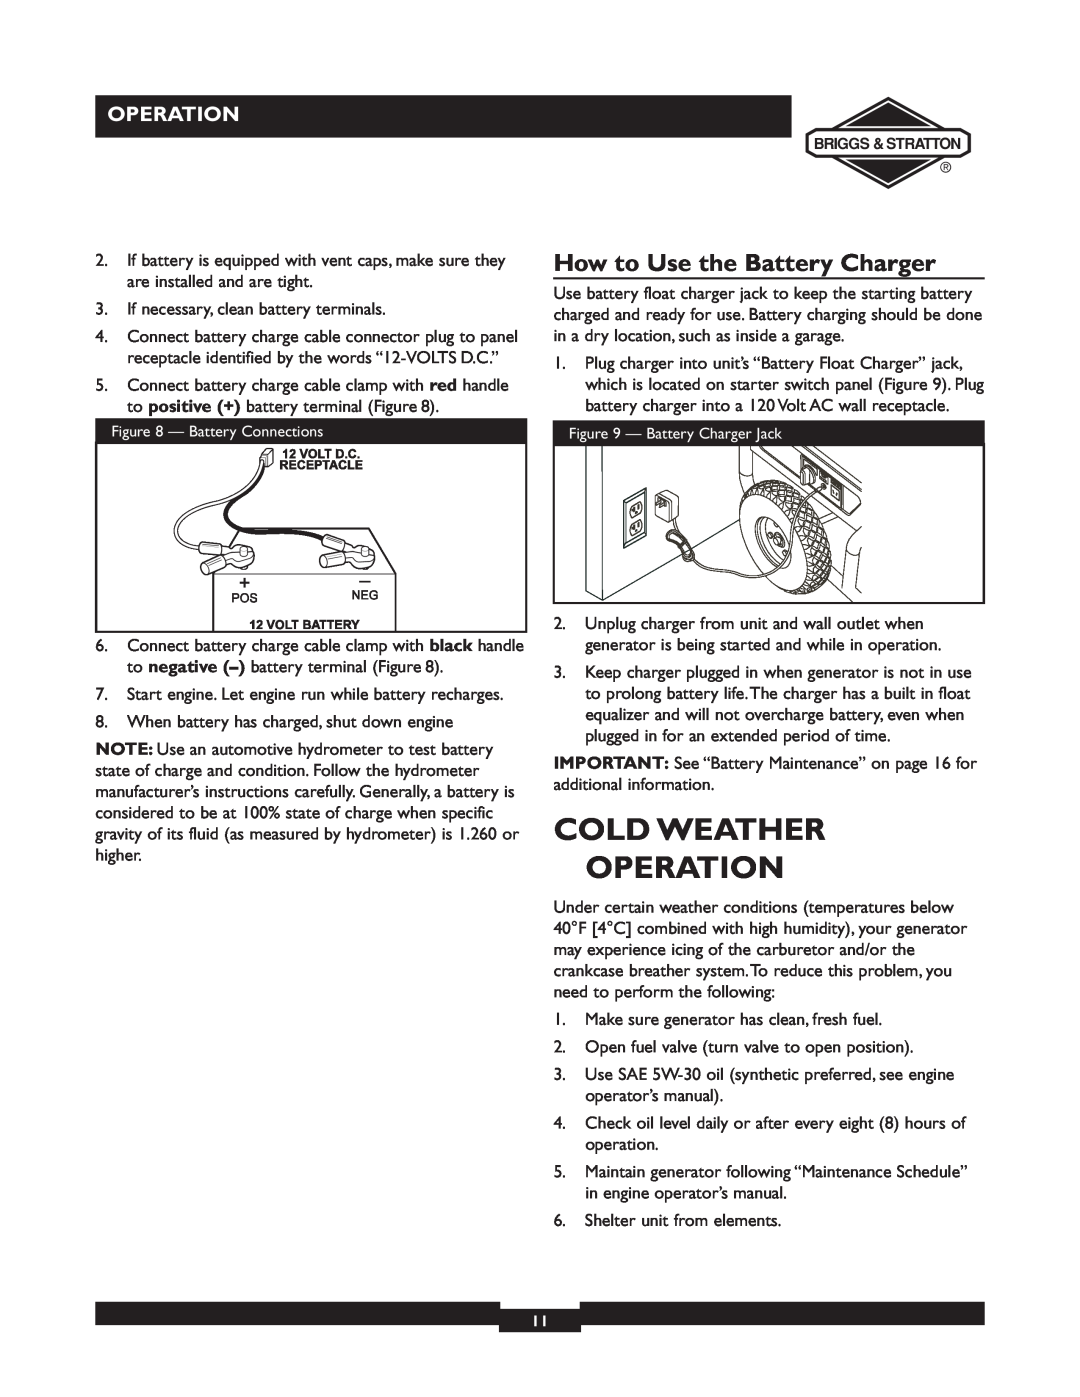 Briggs & Stratton 01894-1 manual Cold Weather Operation, How to Use the Battery Charger 